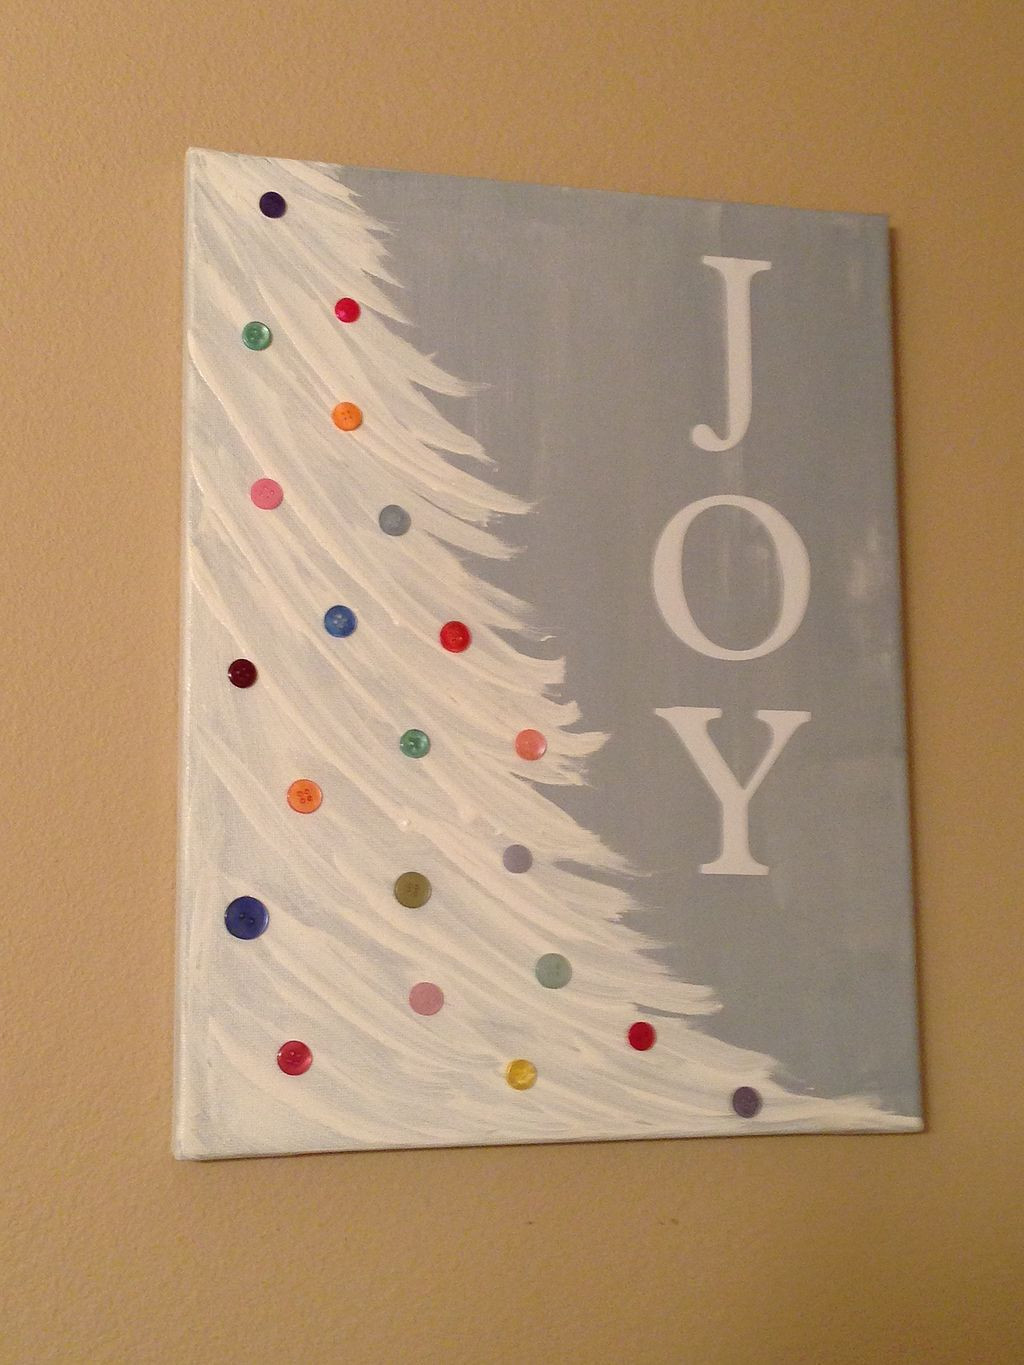 Christmas Canvas Painting Ideas
 Christmas Paintings Canvas Easy Ideas In Home 32